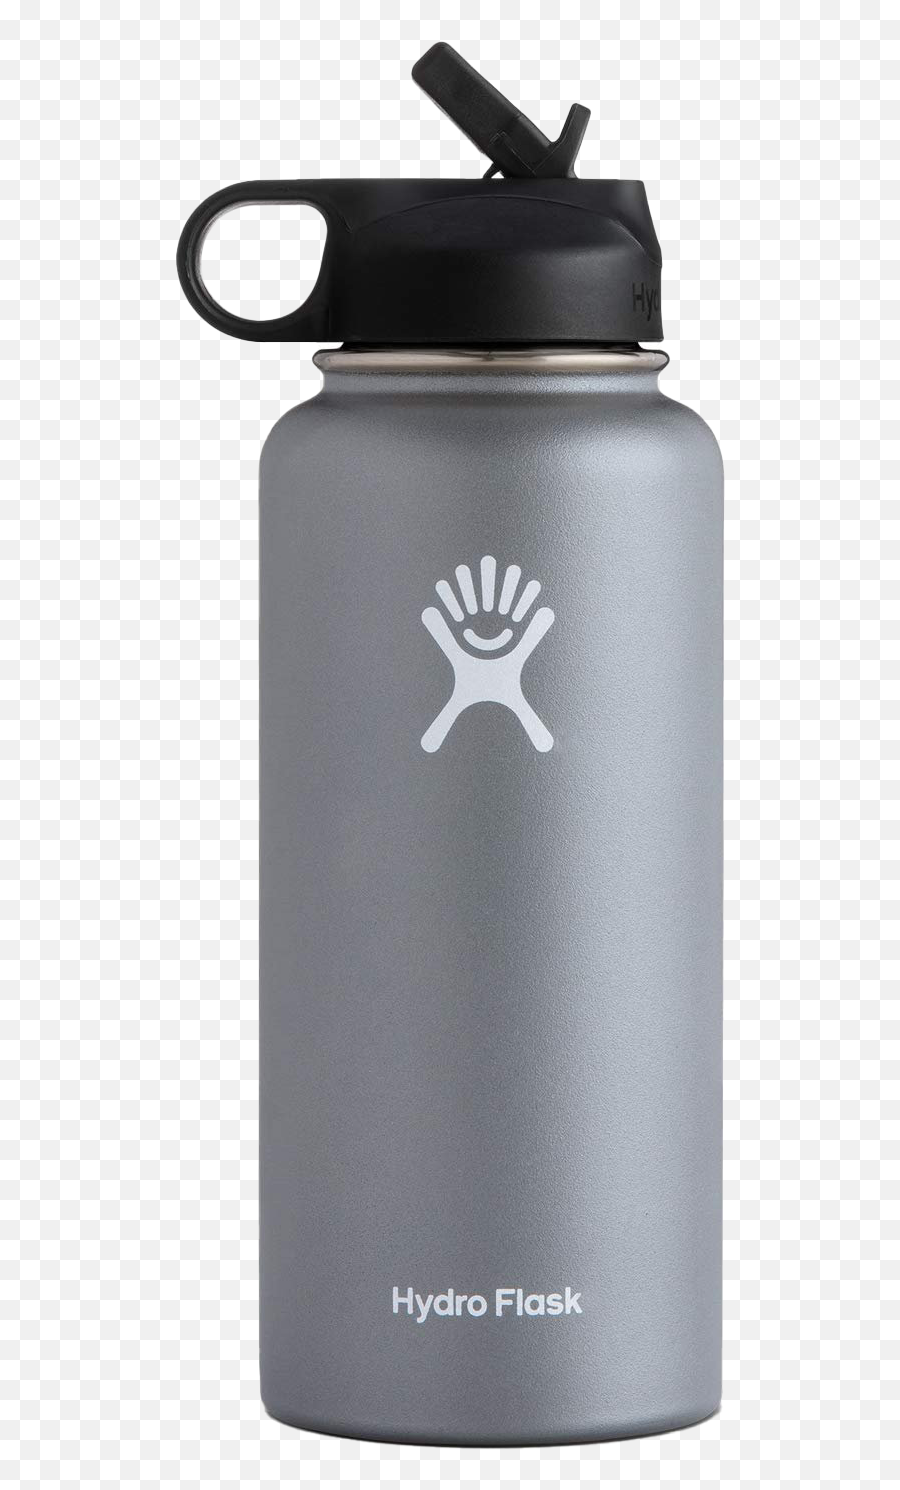 Hydro Flask Png Free Download - Hydro Flask Water Bottle,Hydro Flask Png